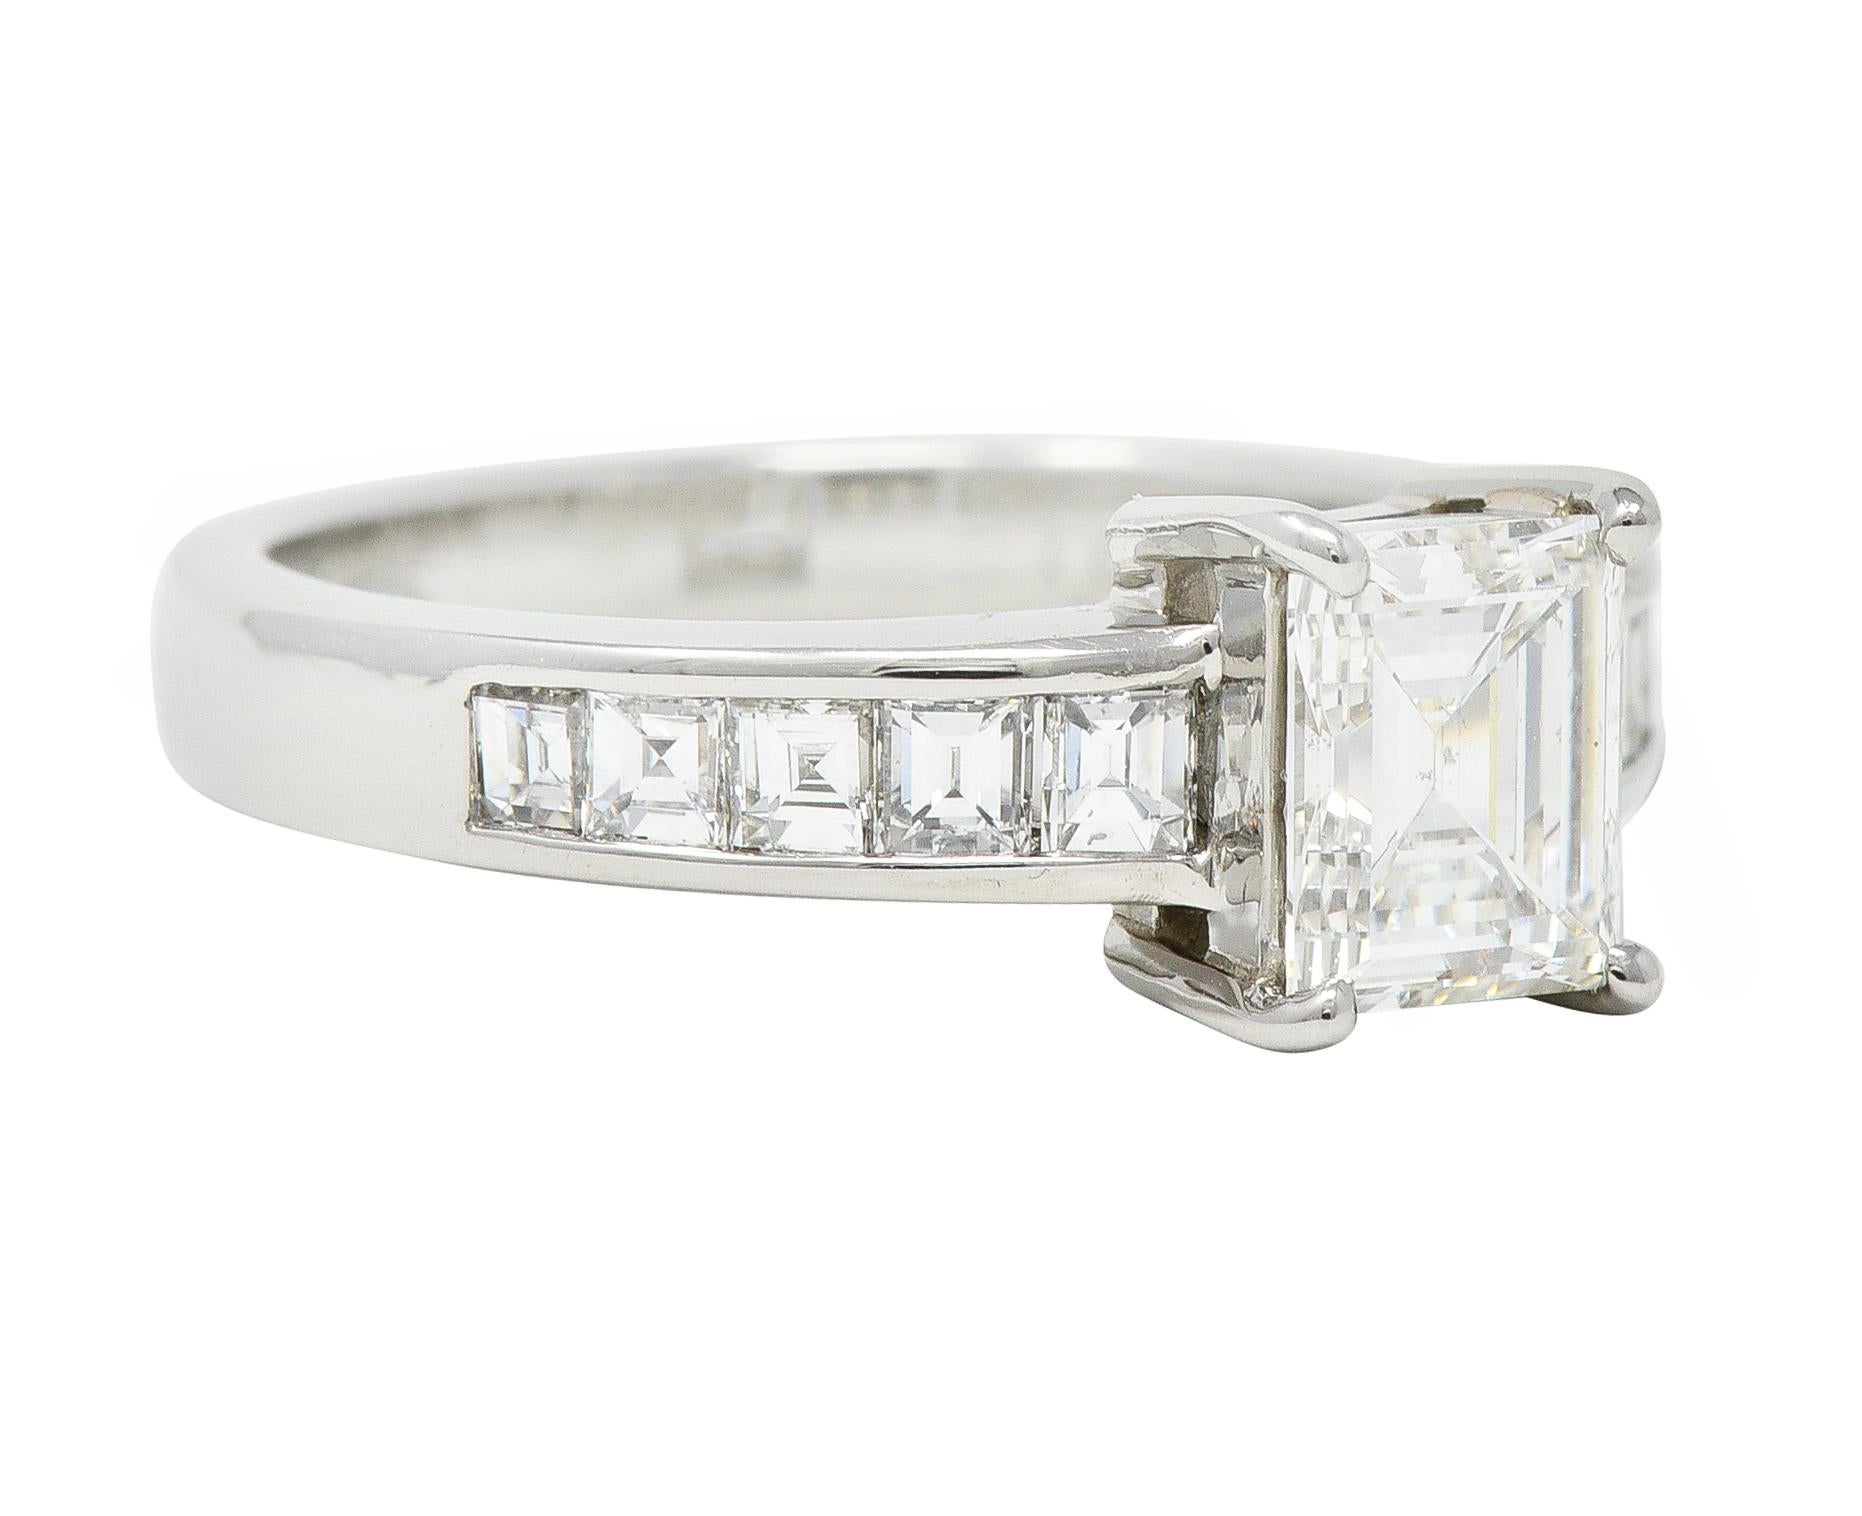 Centering a step cut diamond weighing 1.09 carats - F color with SI1 clarity
Prong set in basket and flanked by additional step cut diamonds
Channel set and weighing 0.70 carat total - G/H color with SI2 clarity
With high polish finish
Inscribed